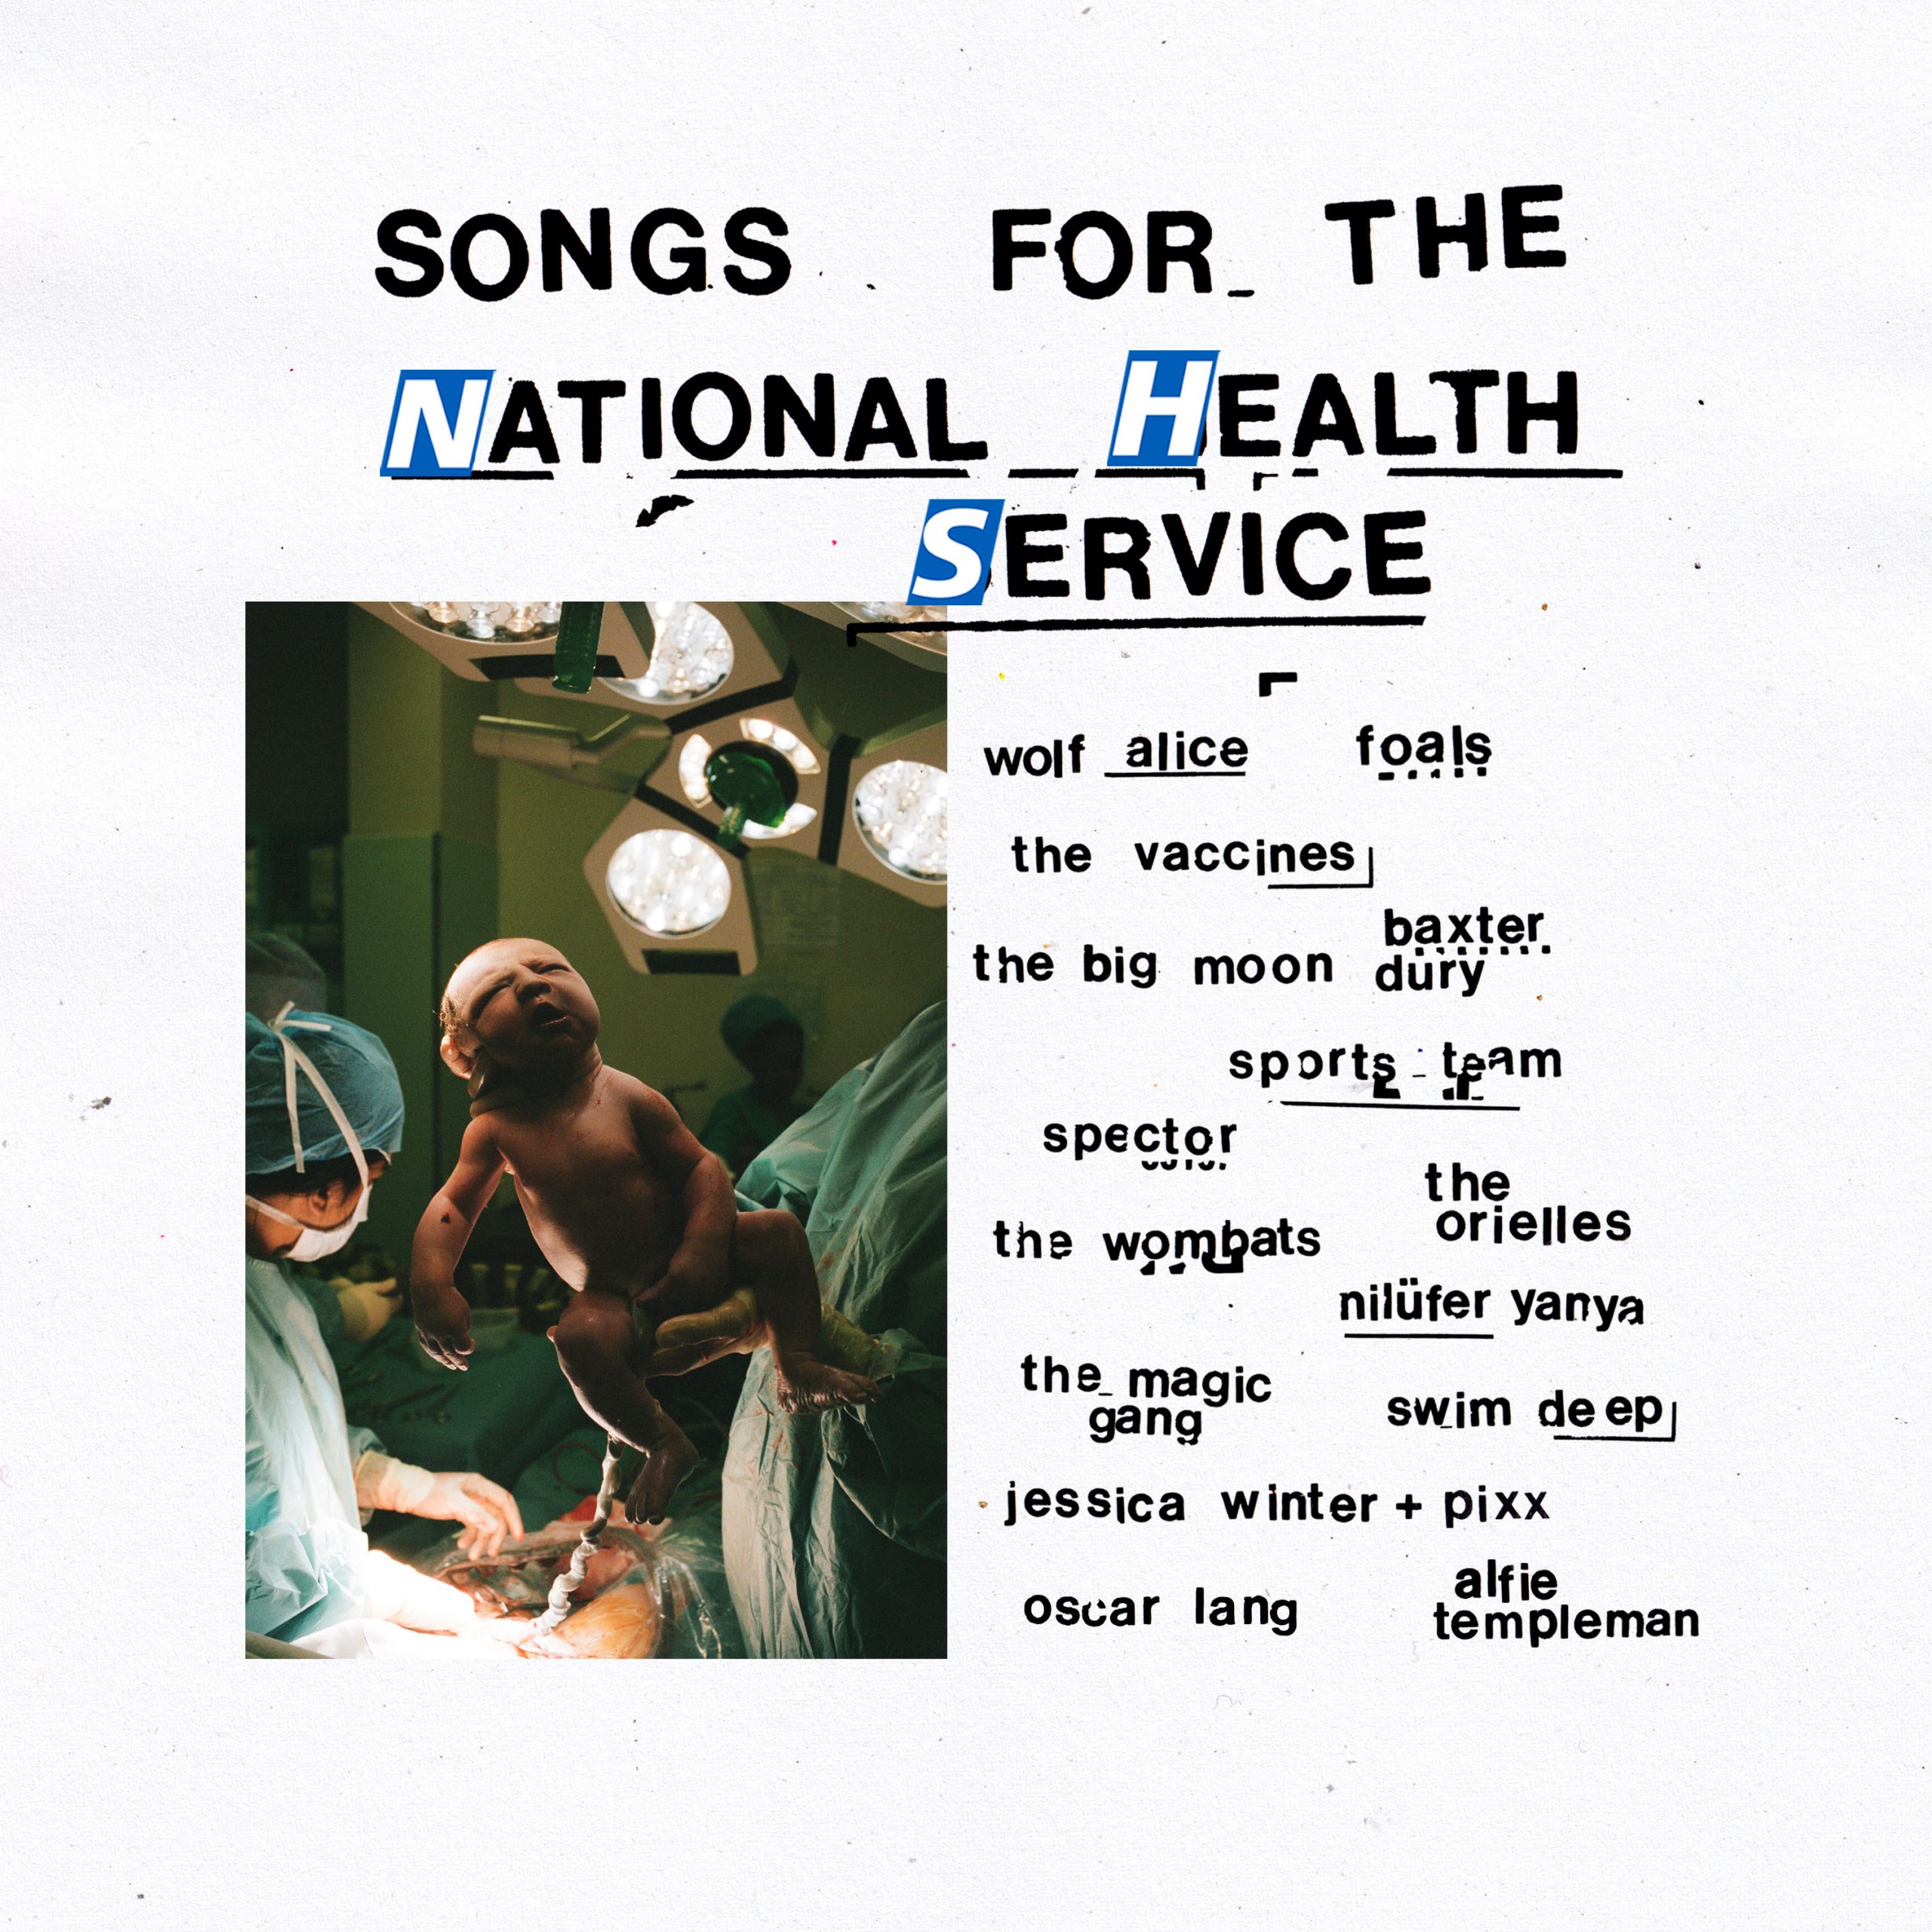 Songs for the NHS